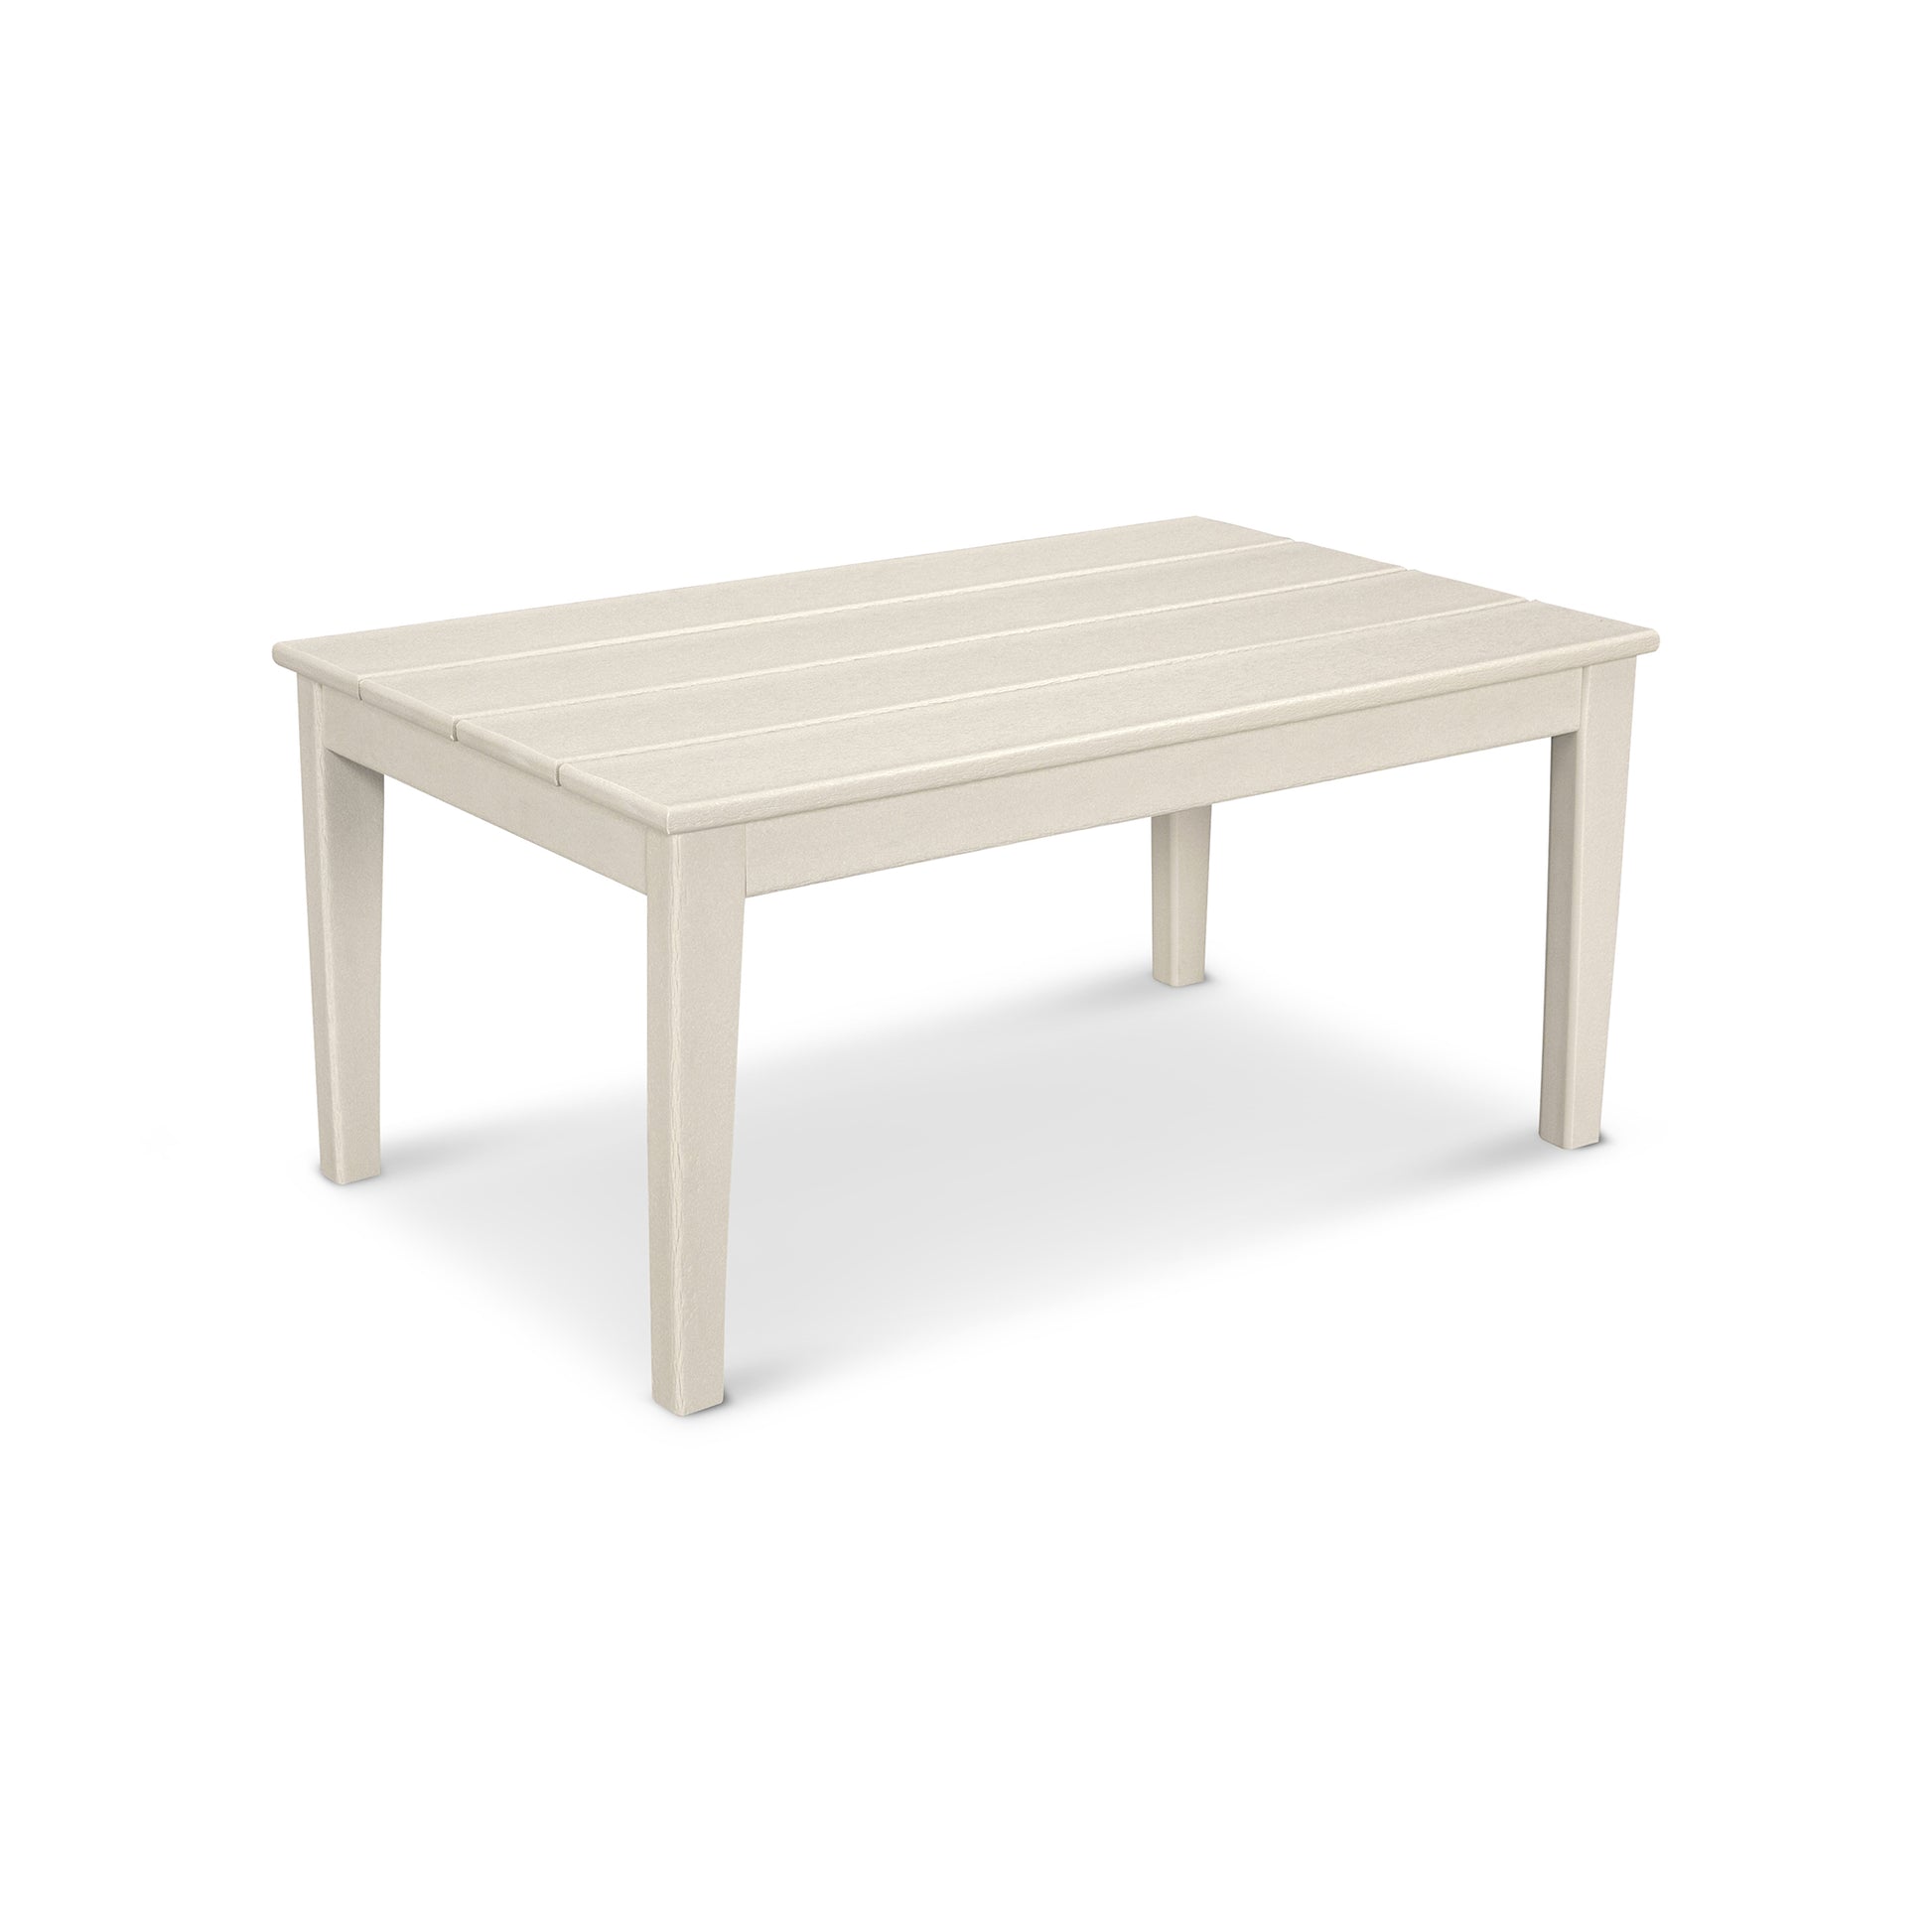 A simple, beige-colored rectangular POLYWOOD Newport 22"x36" Coffee Table on a white background, featuring a textured POLYWOOD® tabletop and straightforward, sturdy legs.